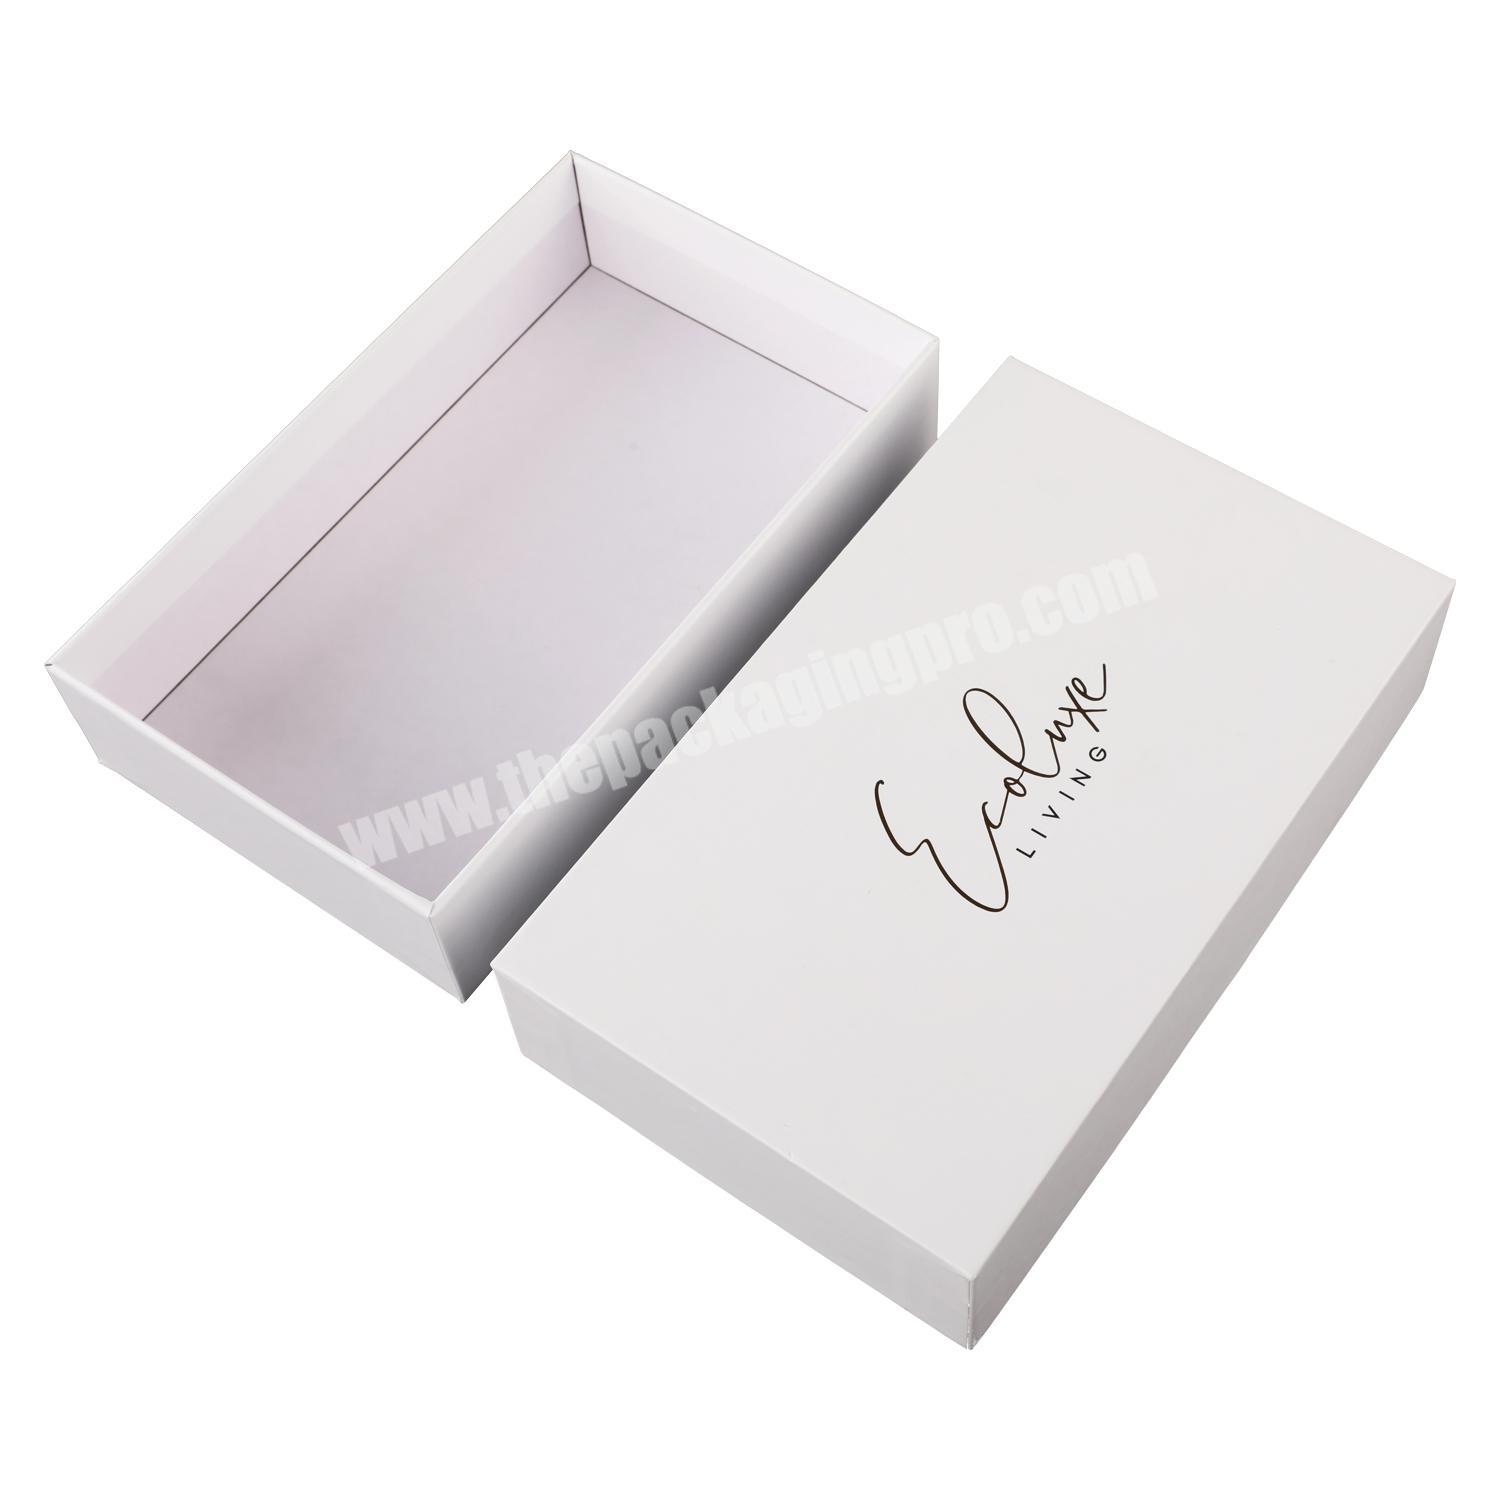 Luxury paper packaging top and base rigid gift box with logo private customized design rigid 2 piece lid and bottom box for wigs